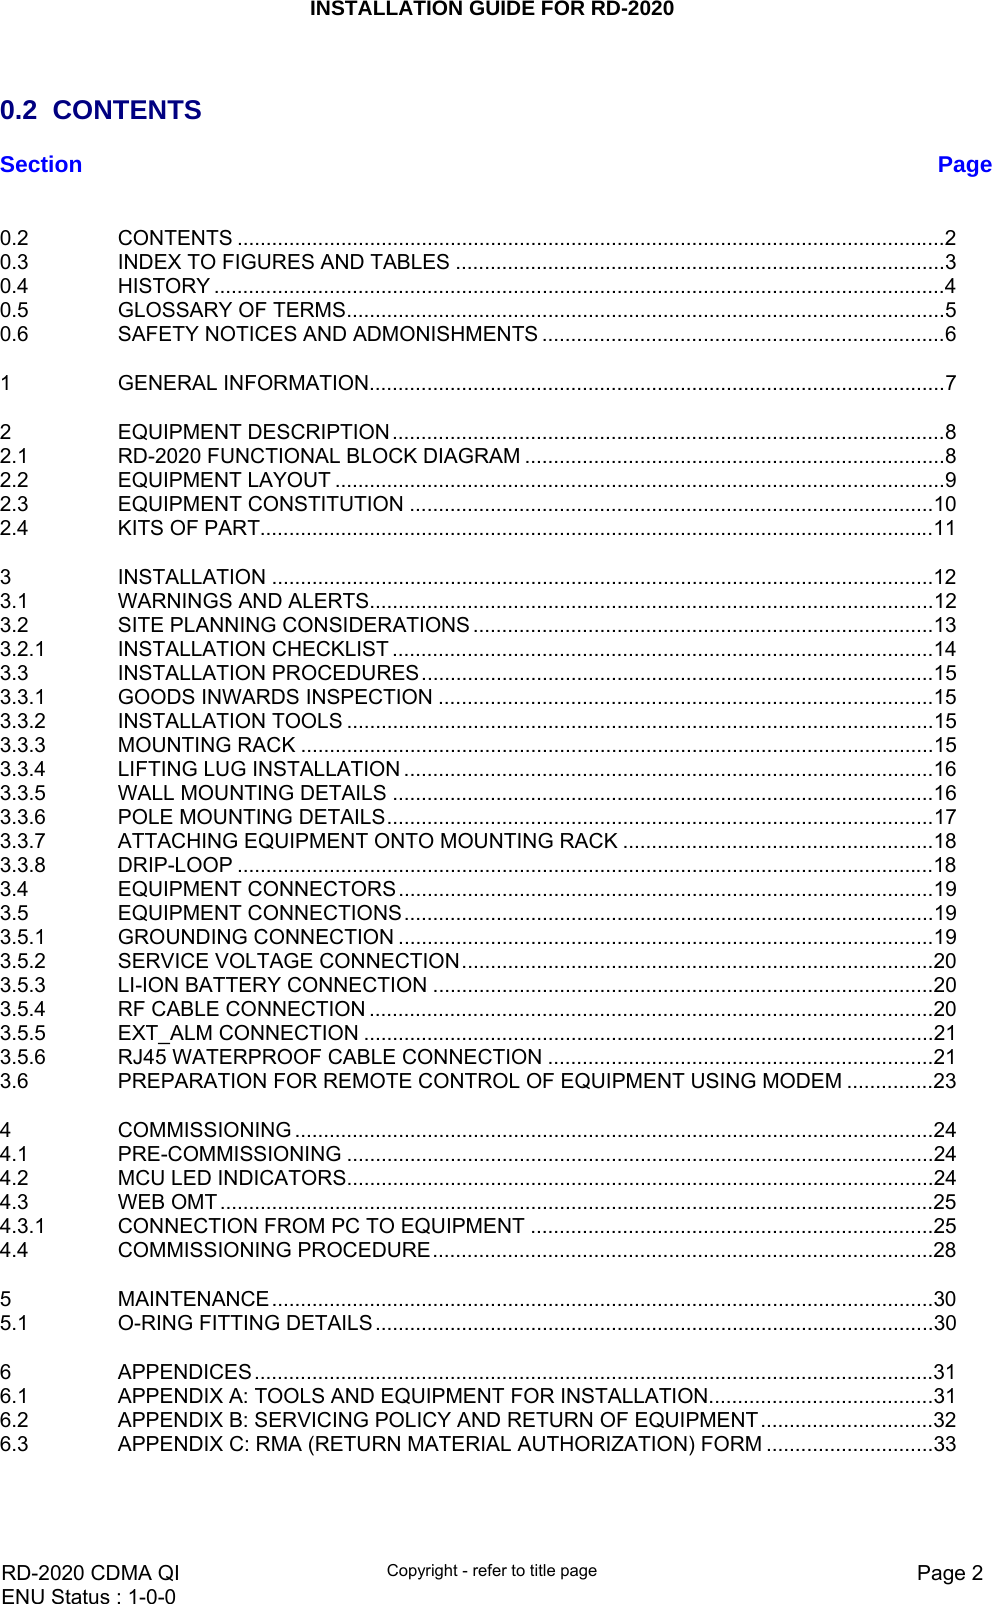 INSTALLATION GUIDE FOR RD-2020    RD-2020 CDMA QI  Copyright - refer to title page  Page 2ENU Status : 1-0-0     0.2 CONTENTS Section  Page 0.2 CONTENTS ...........................................................................................................................2 0.3 INDEX TO FIGURES AND TABLES .....................................................................................3 0.4 HISTORY ...............................................................................................................................4 0.5 GLOSSARY OF TERMS........................................................................................................5 0.6 SAFETY NOTICES AND ADMONISHMENTS ......................................................................6 1 GENERAL INFORMATION....................................................................................................7 2 EQUIPMENT DESCRIPTION................................................................................................8 2.1 RD-2020 FUNCTIONAL BLOCK DIAGRAM .........................................................................8 2.2 EQUIPMENT LAYOUT ..........................................................................................................9 2.3 EQUIPMENT CONSTITUTION ...........................................................................................10 2.4 KITS OF PART.....................................................................................................................11 3 INSTALLATION ...................................................................................................................12 3.1 WARNINGS AND ALERTS..................................................................................................12 3.2 SITE PLANNING CONSIDERATIONS ................................................................................13 3.2.1 INSTALLATION CHECKLIST ..............................................................................................14 3.3 INSTALLATION PROCEDURES.........................................................................................15 3.3.1 GOODS INWARDS INSPECTION ......................................................................................15 3.3.2 INSTALLATION TOOLS ......................................................................................................15 3.3.3 MOUNTING RACK ..............................................................................................................15 3.3.4 LIFTING LUG INSTALLATION ............................................................................................16 3.3.5 WALL MOUNTING DETAILS ..............................................................................................16 3.3.6 POLE MOUNTING DETAILS...............................................................................................17 3.3.7 ATTACHING EQUIPMENT ONTO MOUNTING RACK ......................................................18 3.3.8 DRIP-LOOP .........................................................................................................................18 3.4 EQUIPMENT CONNECTORS.............................................................................................19 3.5 EQUIPMENT CONNECTIONS............................................................................................19 3.5.1 GROUNDING CONNECTION .............................................................................................19 3.5.2 SERVICE VOLTAGE CONNECTION..................................................................................20 3.5.3 LI-ION BATTERY CONNECTION .......................................................................................20 3.5.4 RF CABLE CONNECTION ..................................................................................................20 3.5.5 EXT_ALM CONNECTION ...................................................................................................21 3.5.6 RJ45 WATERPROOF CABLE CONNECTION ...................................................................21 3.6 PREPARATION FOR REMOTE CONTROL OF EQUIPMENT USING MODEM ...............23 4 COMMISSIONING ...............................................................................................................24 4.1 PRE-COMMISSIONING ......................................................................................................24 4.2 MCU LED INDICATORS......................................................................................................24 4.3 WEB OMT ............................................................................................................................25 4.3.1 CONNECTION FROM PC TO EQUIPMENT ......................................................................25 4.4 COMMISSIONING PROCEDURE.......................................................................................28 5 MAINTENANCE...................................................................................................................30 5.1 O-RING FITTING DETAILS.................................................................................................30 6 APPENDICES......................................................................................................................31 6.1 APPENDIX A: TOOLS AND EQUIPMENT FOR INSTALLATION.......................................31 6.2 APPENDIX B: SERVICING POLICY AND RETURN OF EQUIPMENT..............................32 6.3 APPENDIX C: RMA (RETURN MATERIAL AUTHORIZATION) FORM .............................33 